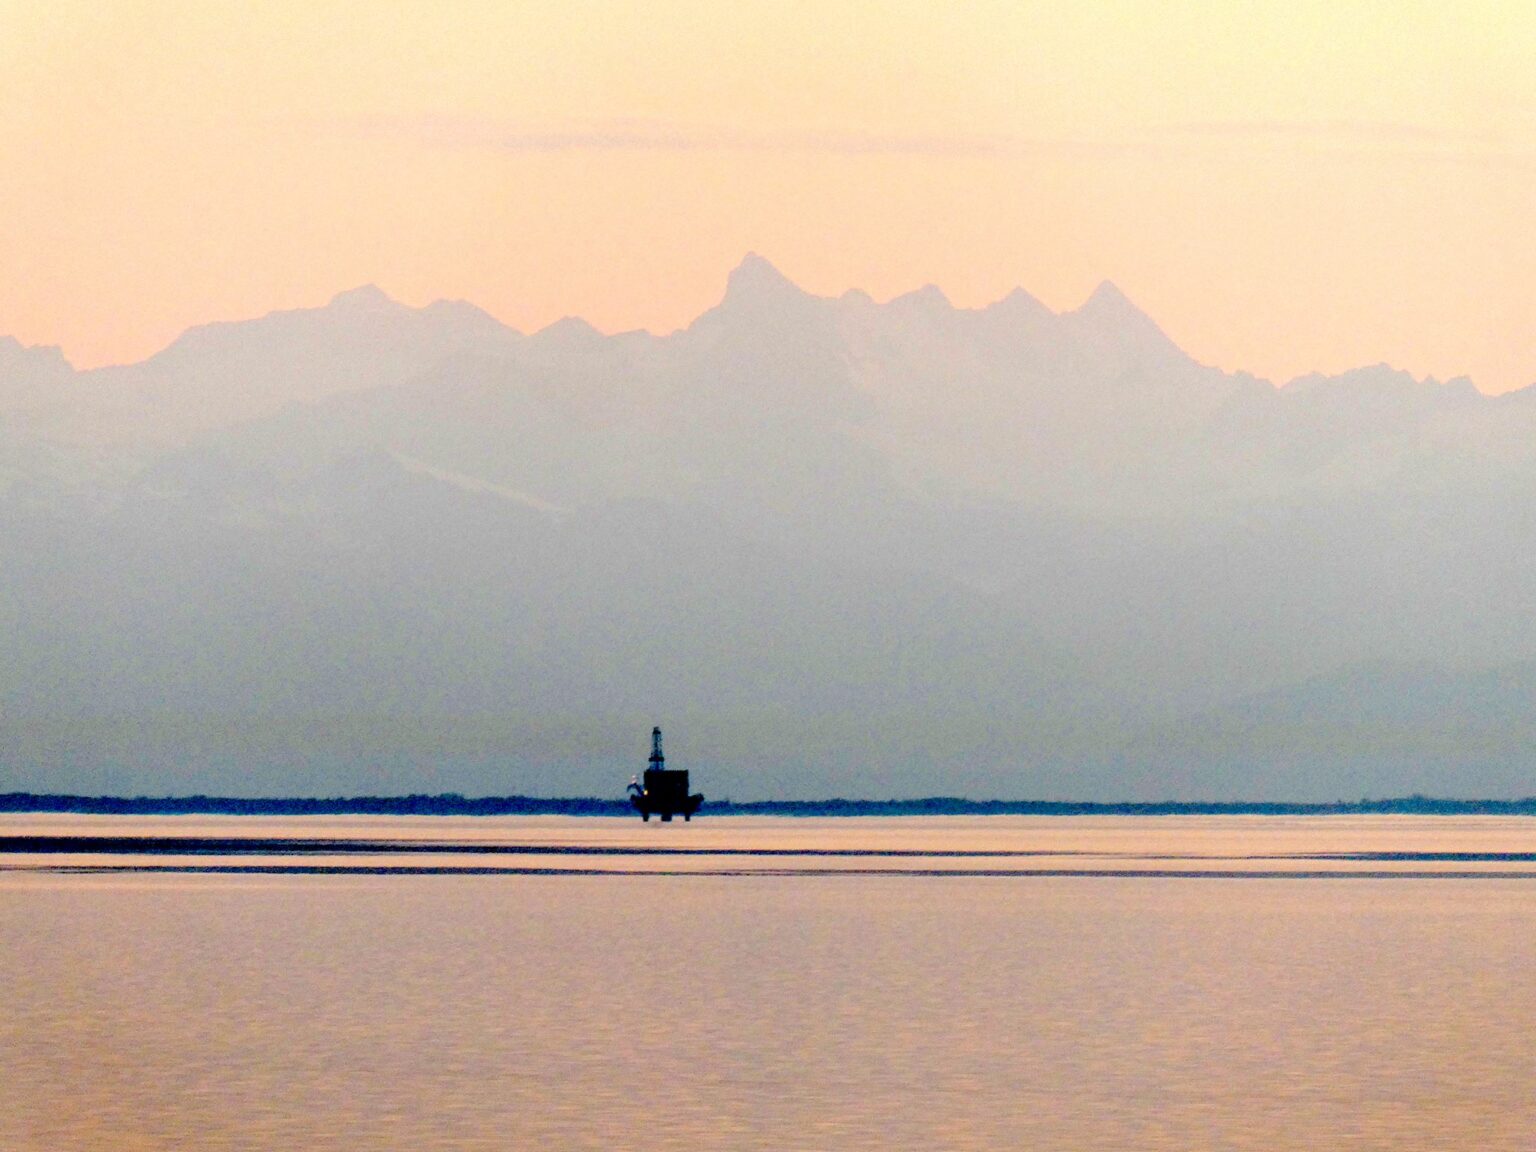 An offshore drilling platform in the distance at sunset with mountains behind.